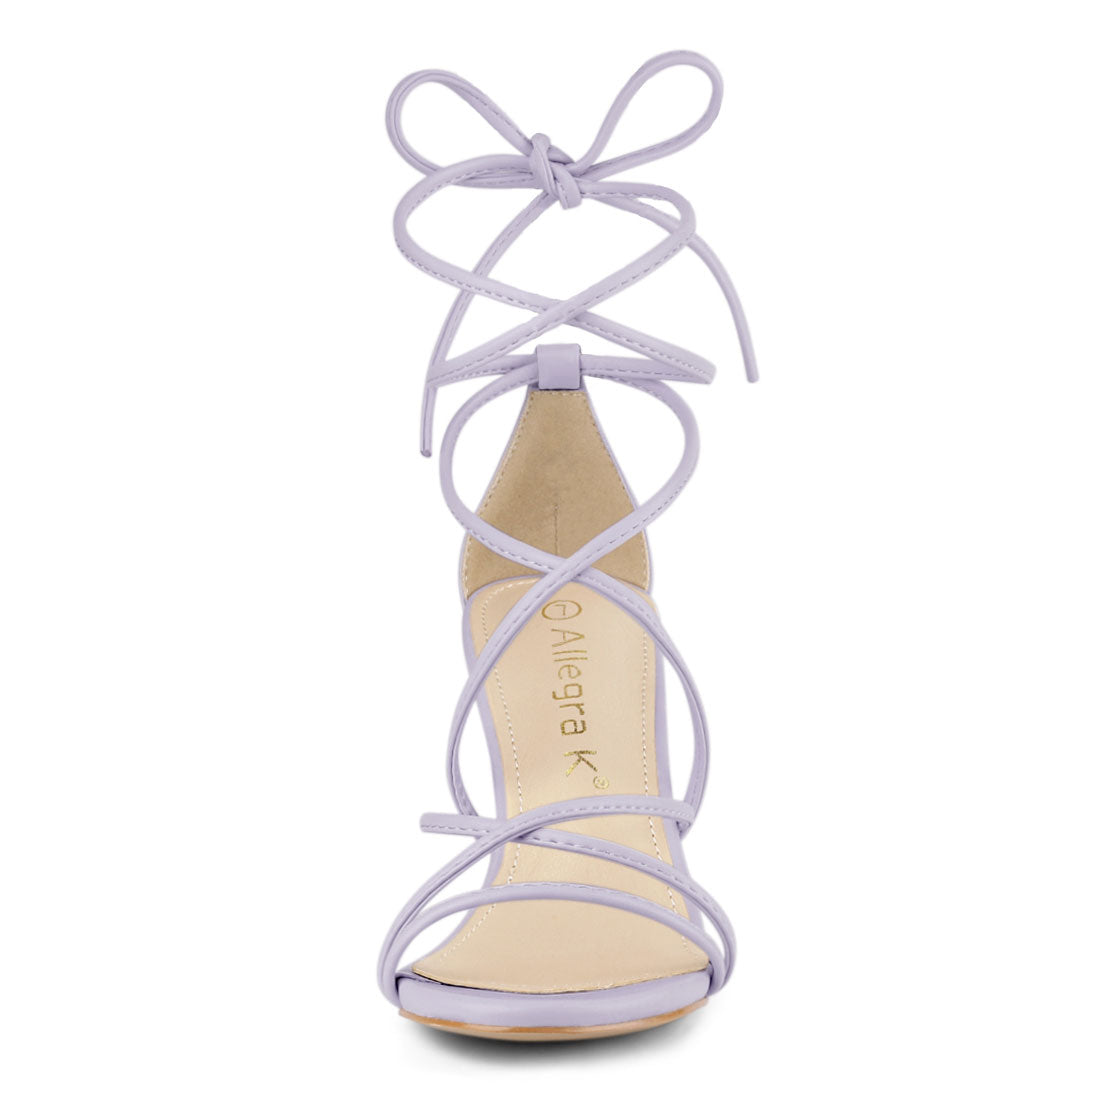 Allegra K Strappy Straps Lace Up Chunky Gold Heel Sandals Light Purple